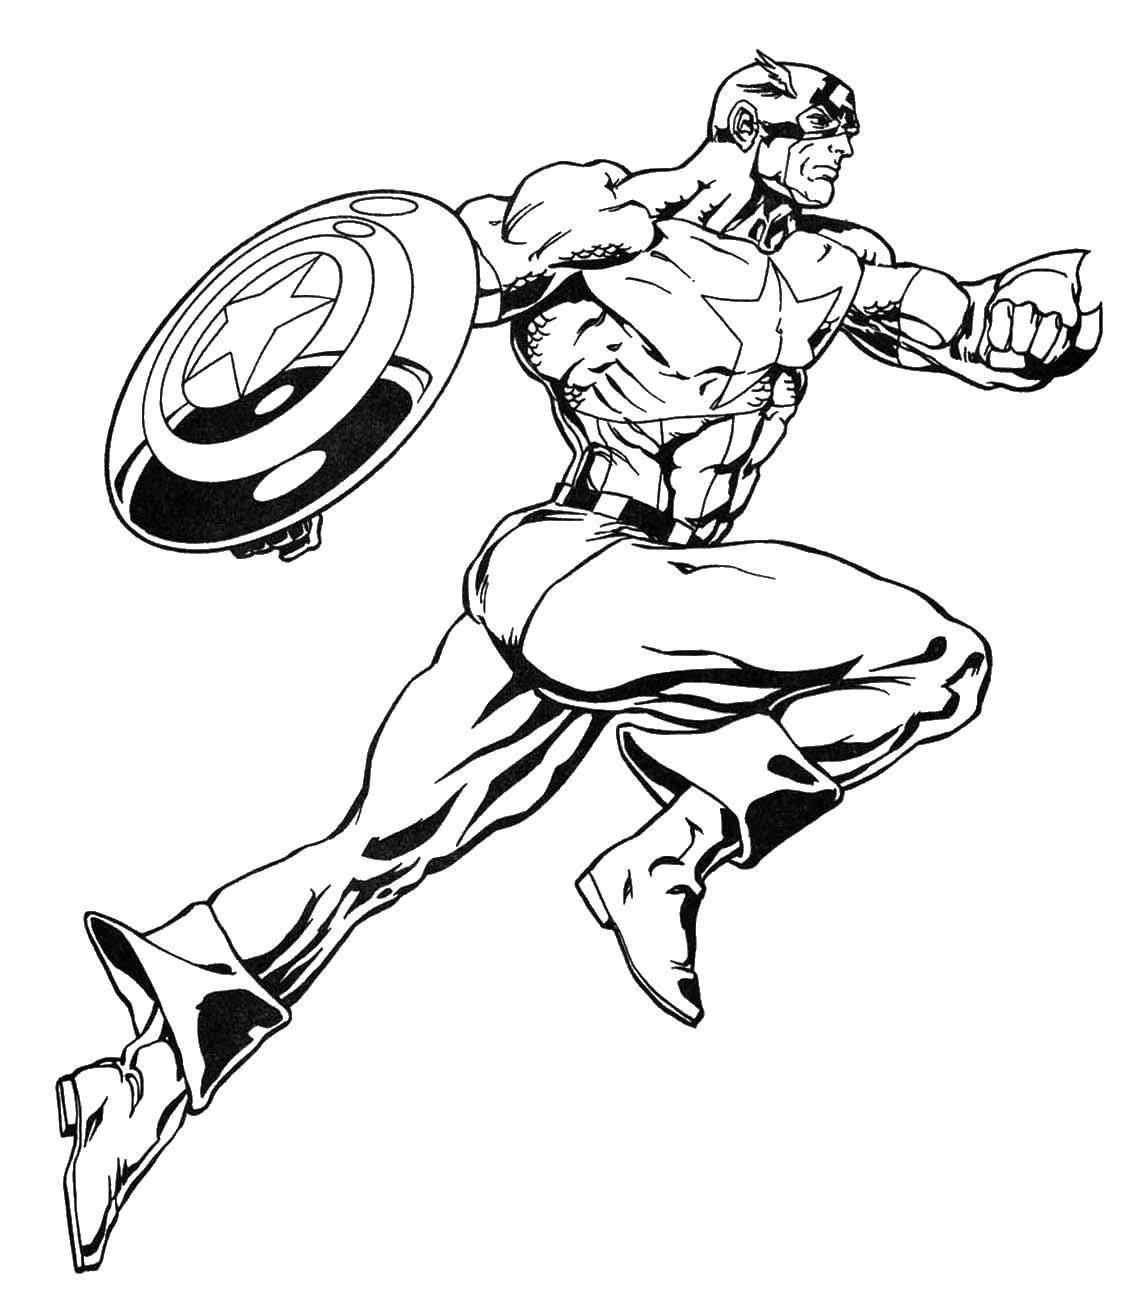 Coloring Captain America. Category superheroes. Tags:  movies, superheroes, captain America.